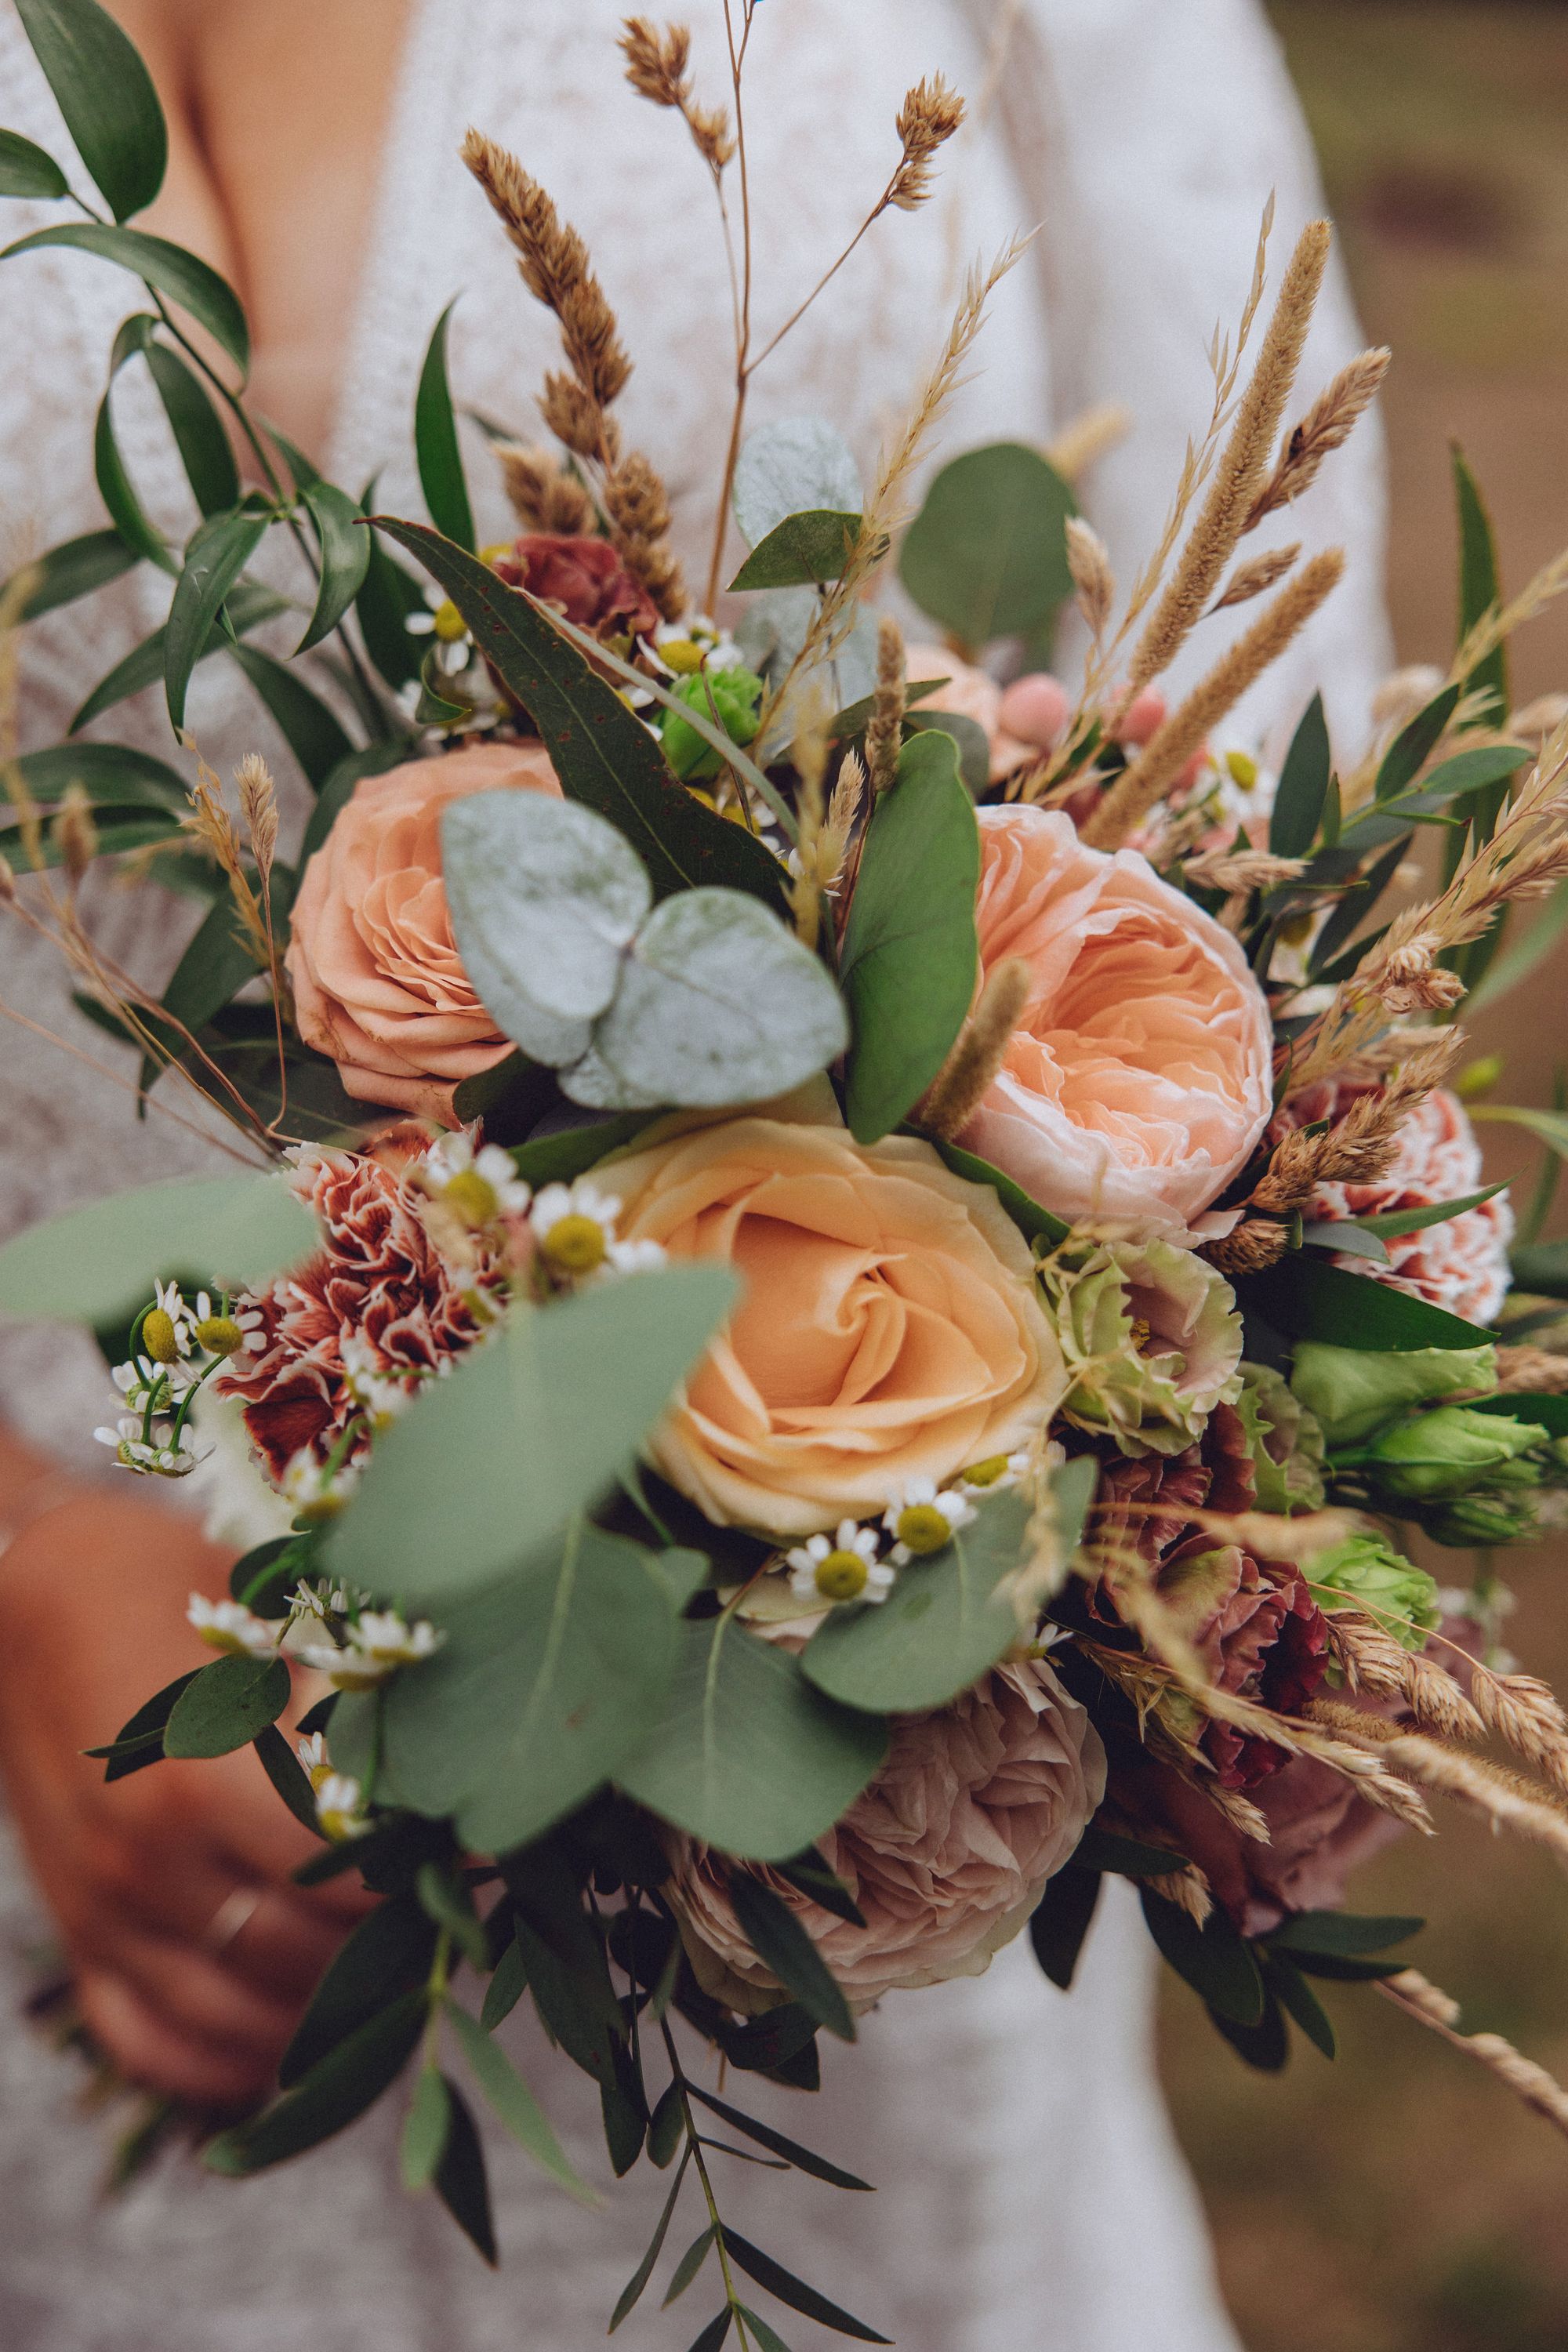 Nor's beautiful bridal bouquet with mixture of roses and greenery by Lovell Floristry. Photo thanks to Fordtography.